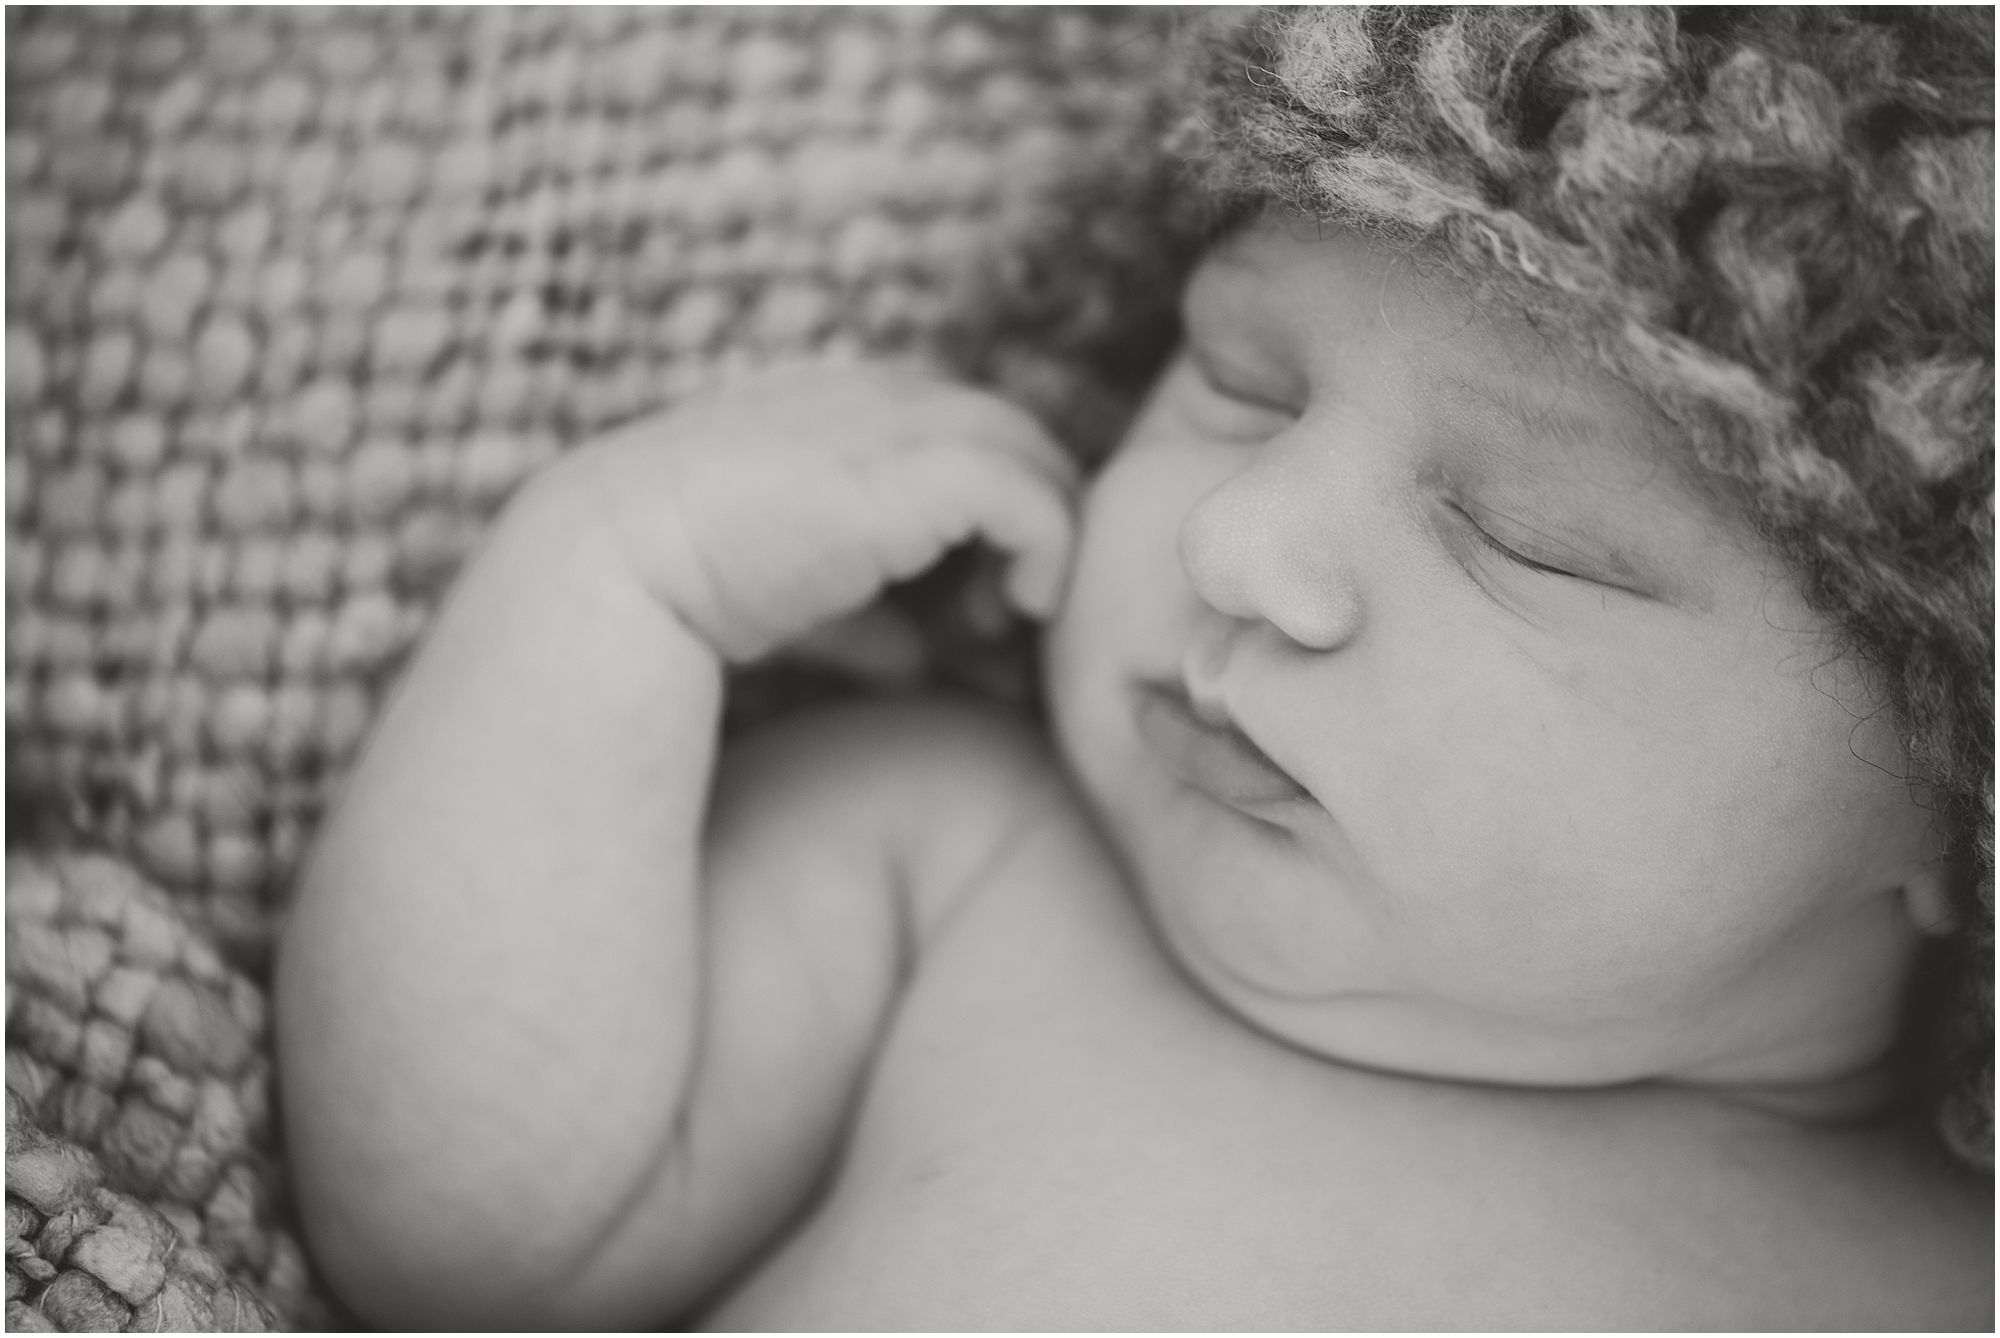 newborn baby max, photographed at home in Cardiff, South Wales